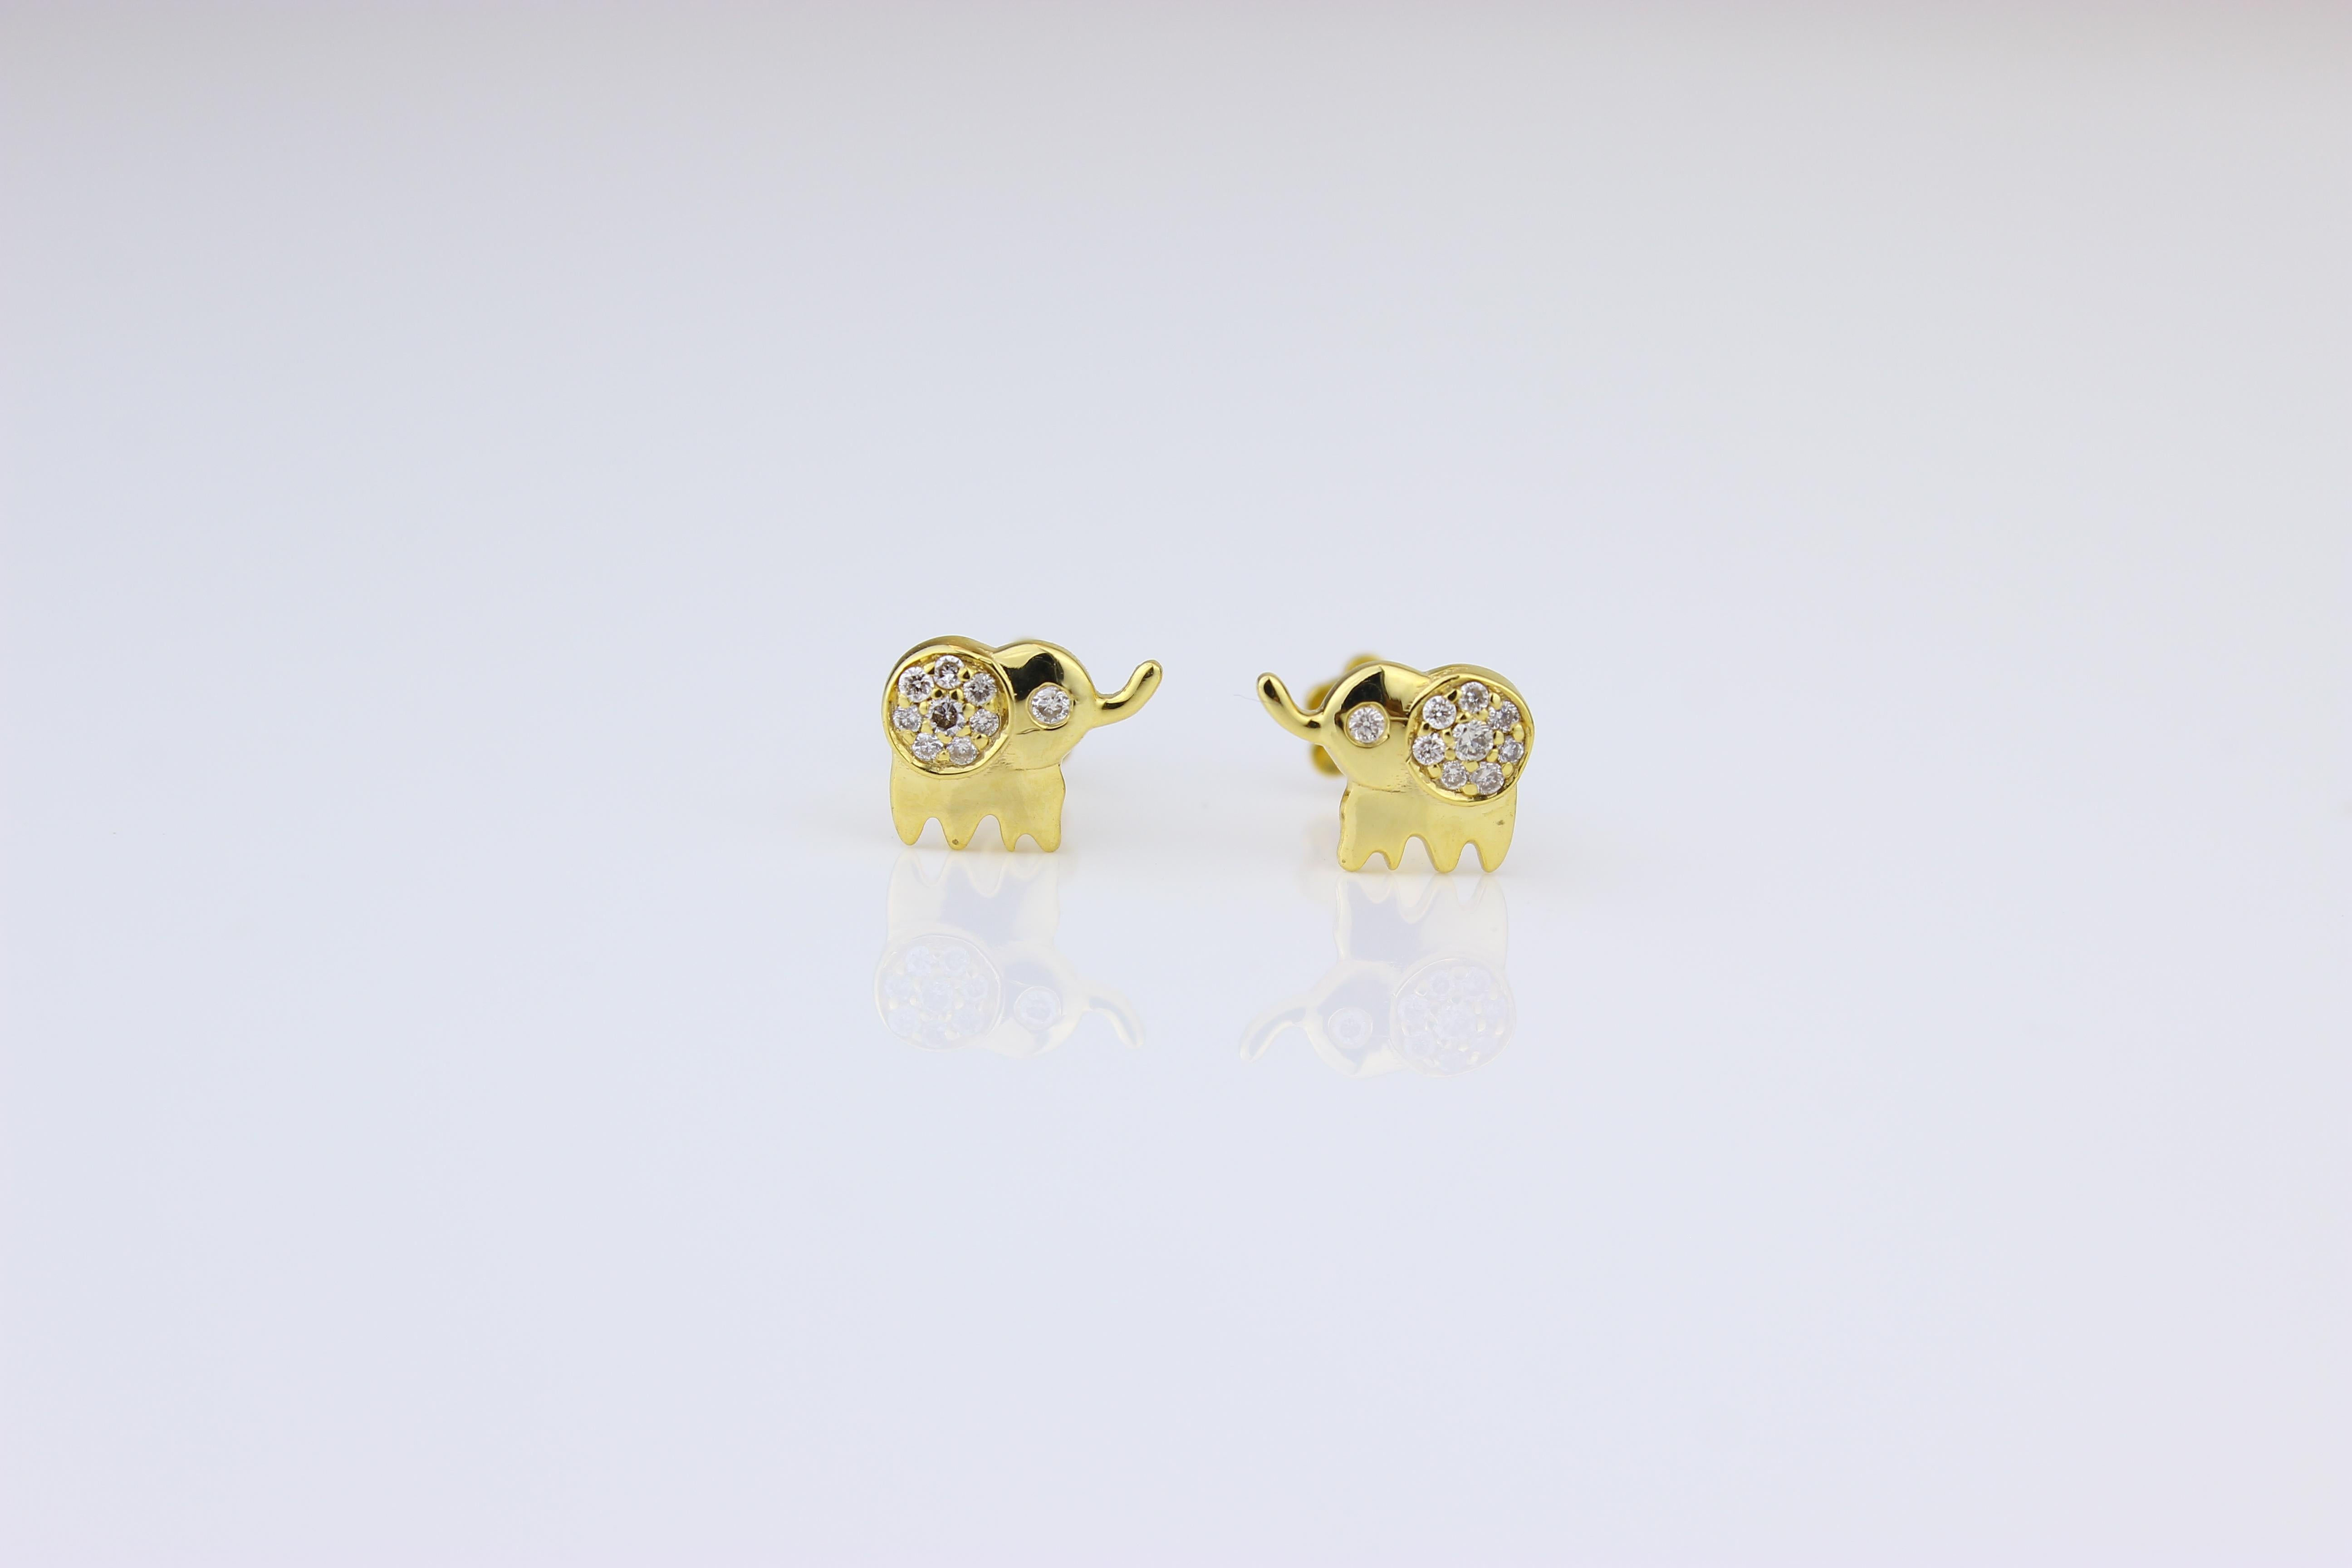 Adorable Elephant Diamond Earrings designed especially for girls (kids/toddlers), crafted in high-quality 18K Solid Gold. These charming earrings feature delicate diamond accents, adding a touch of sparkle and symbolism to your child's style while